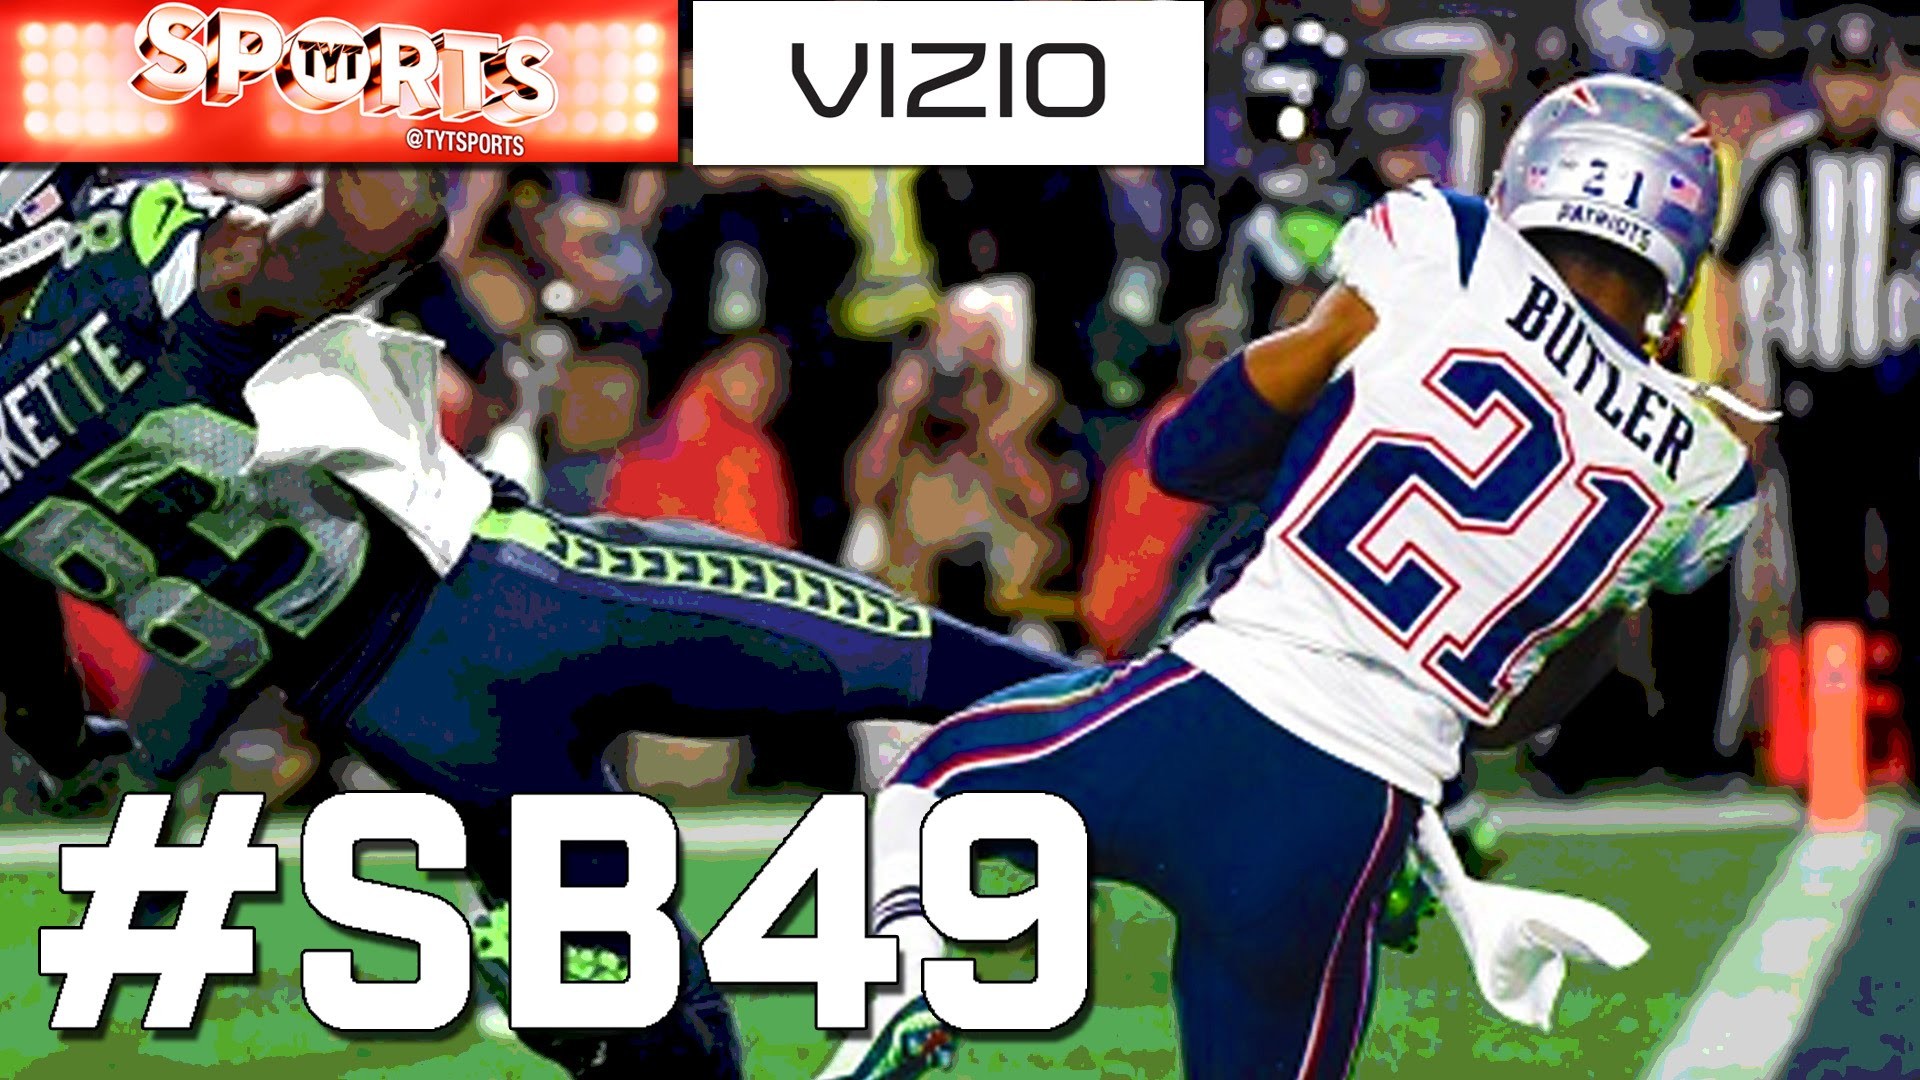 1920x1080 Super Bowl 49 Patriots vs. Seahawks 28-24 | POV on Final Play, Tweets from  Players - YouTube